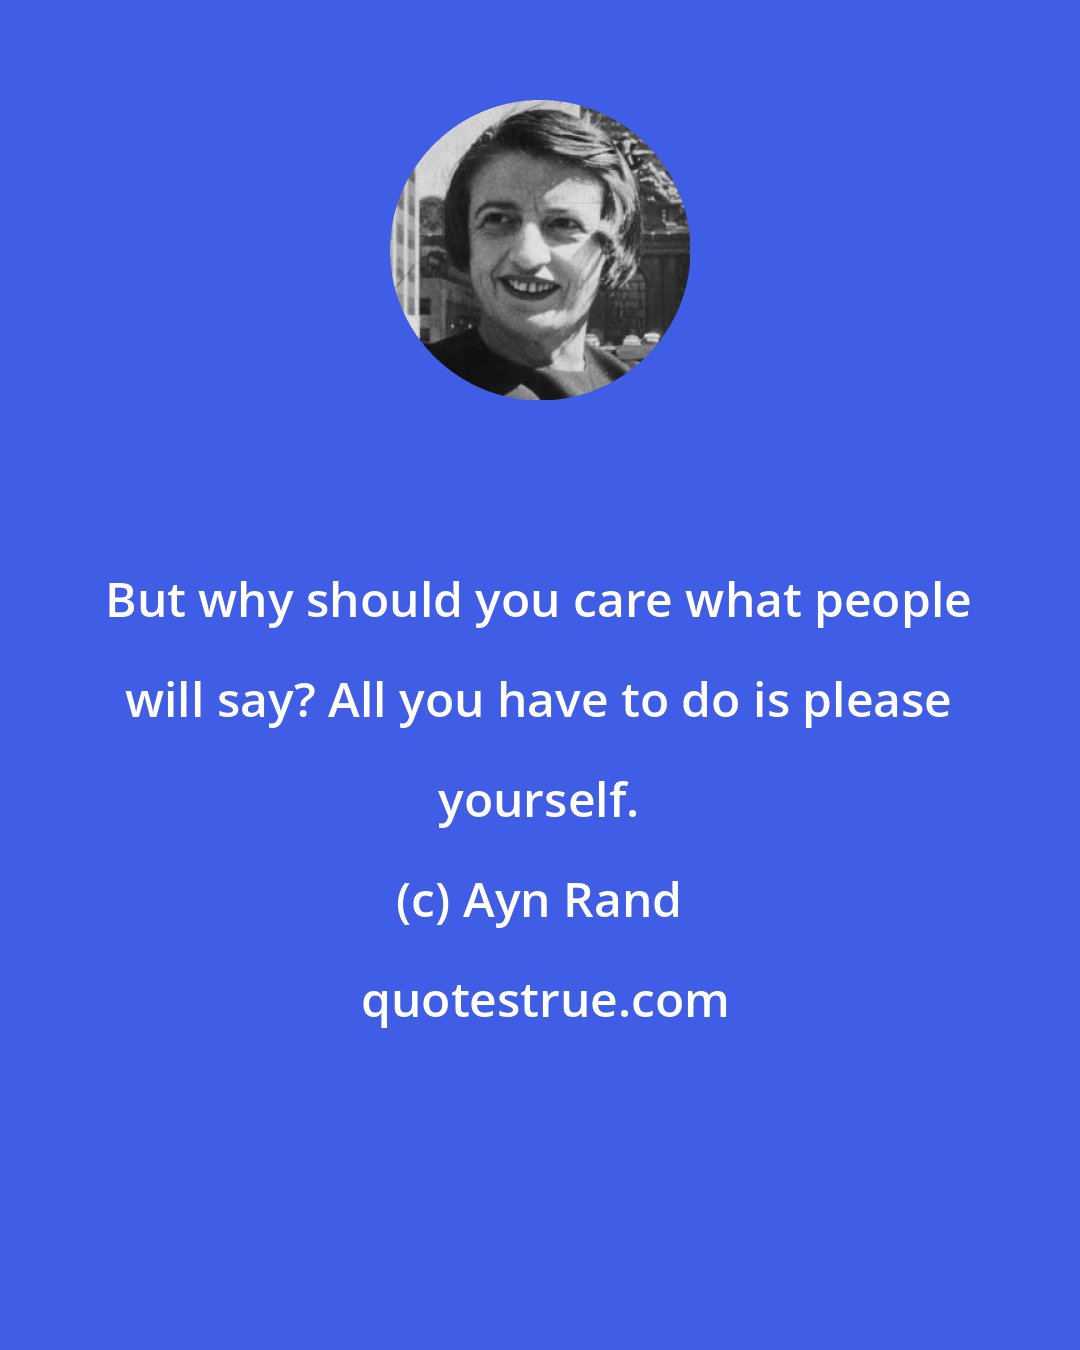 Ayn Rand: But why should you care what people will say? All you have to do is please yourself.